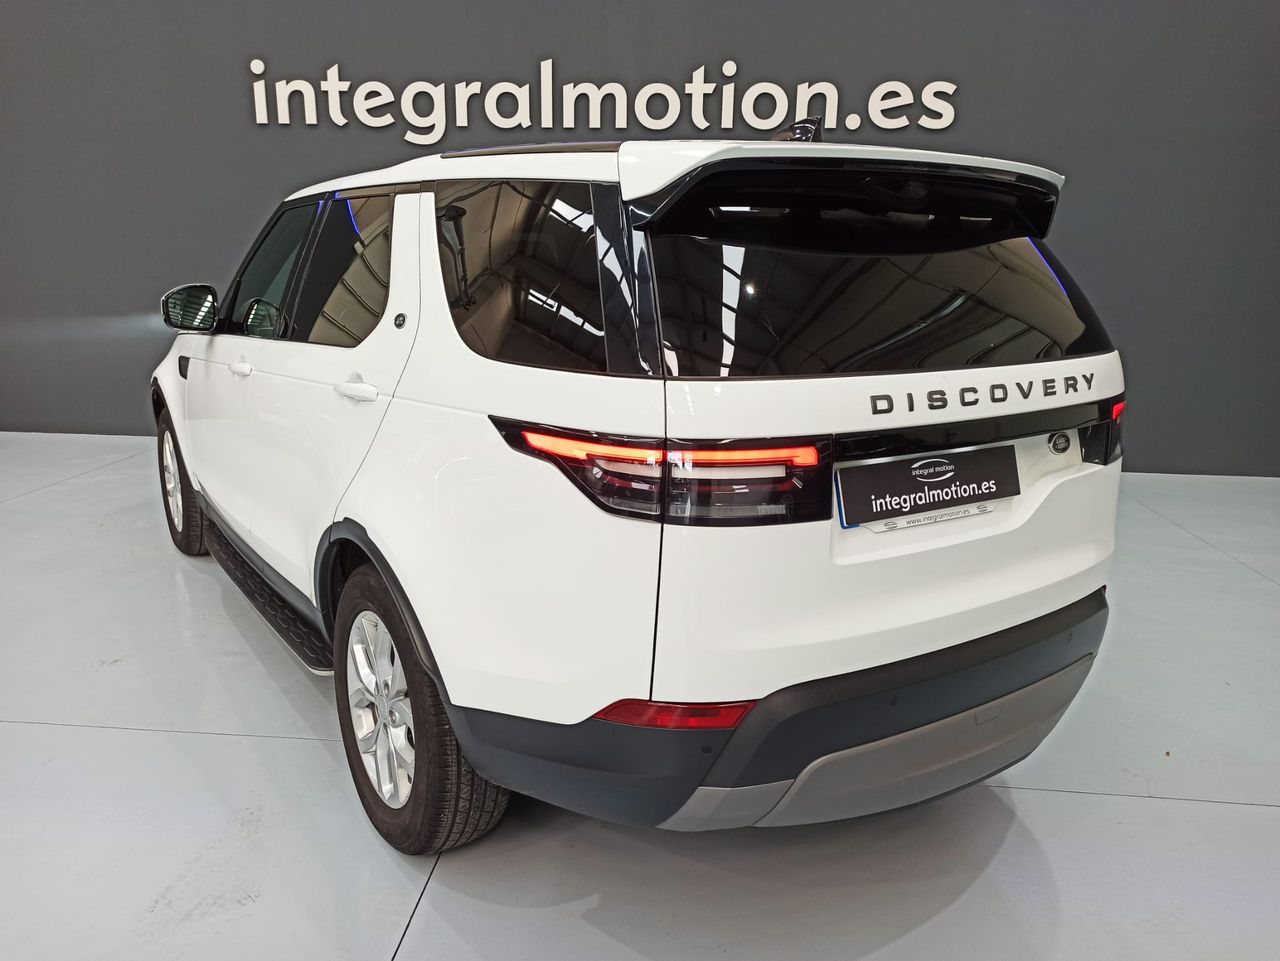 Foto Land-Rover Discovery 20